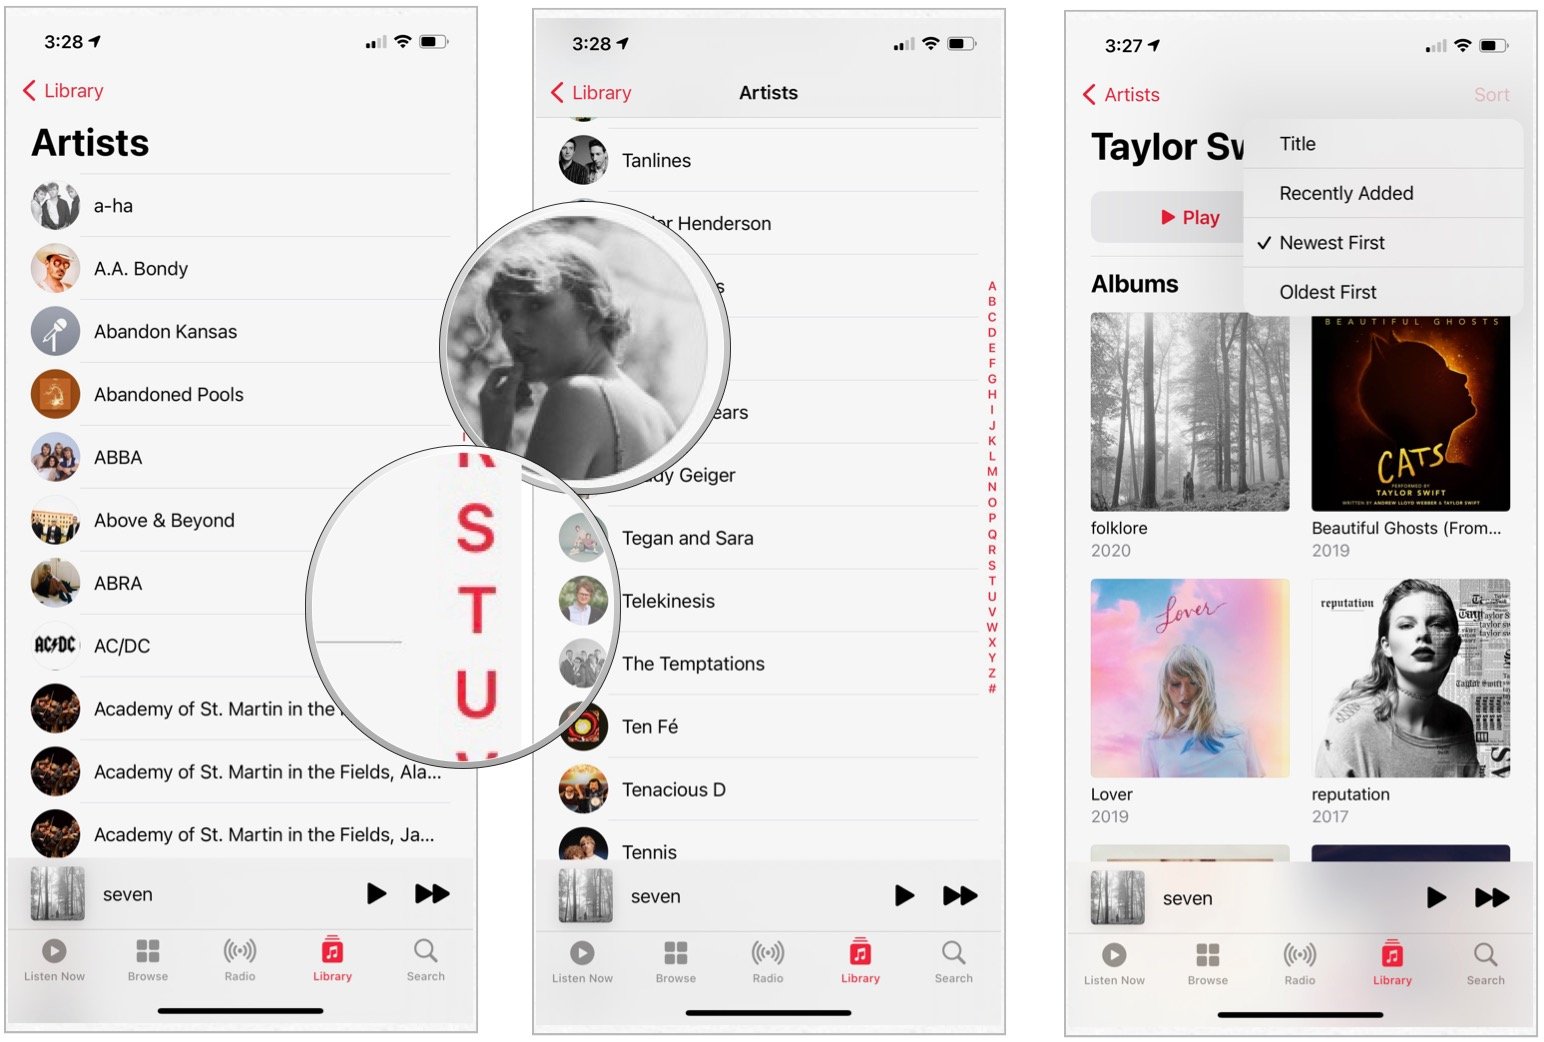 To sort albums on mobile, find your artist, then tap Sort. Choose Newest First or Oldest First.